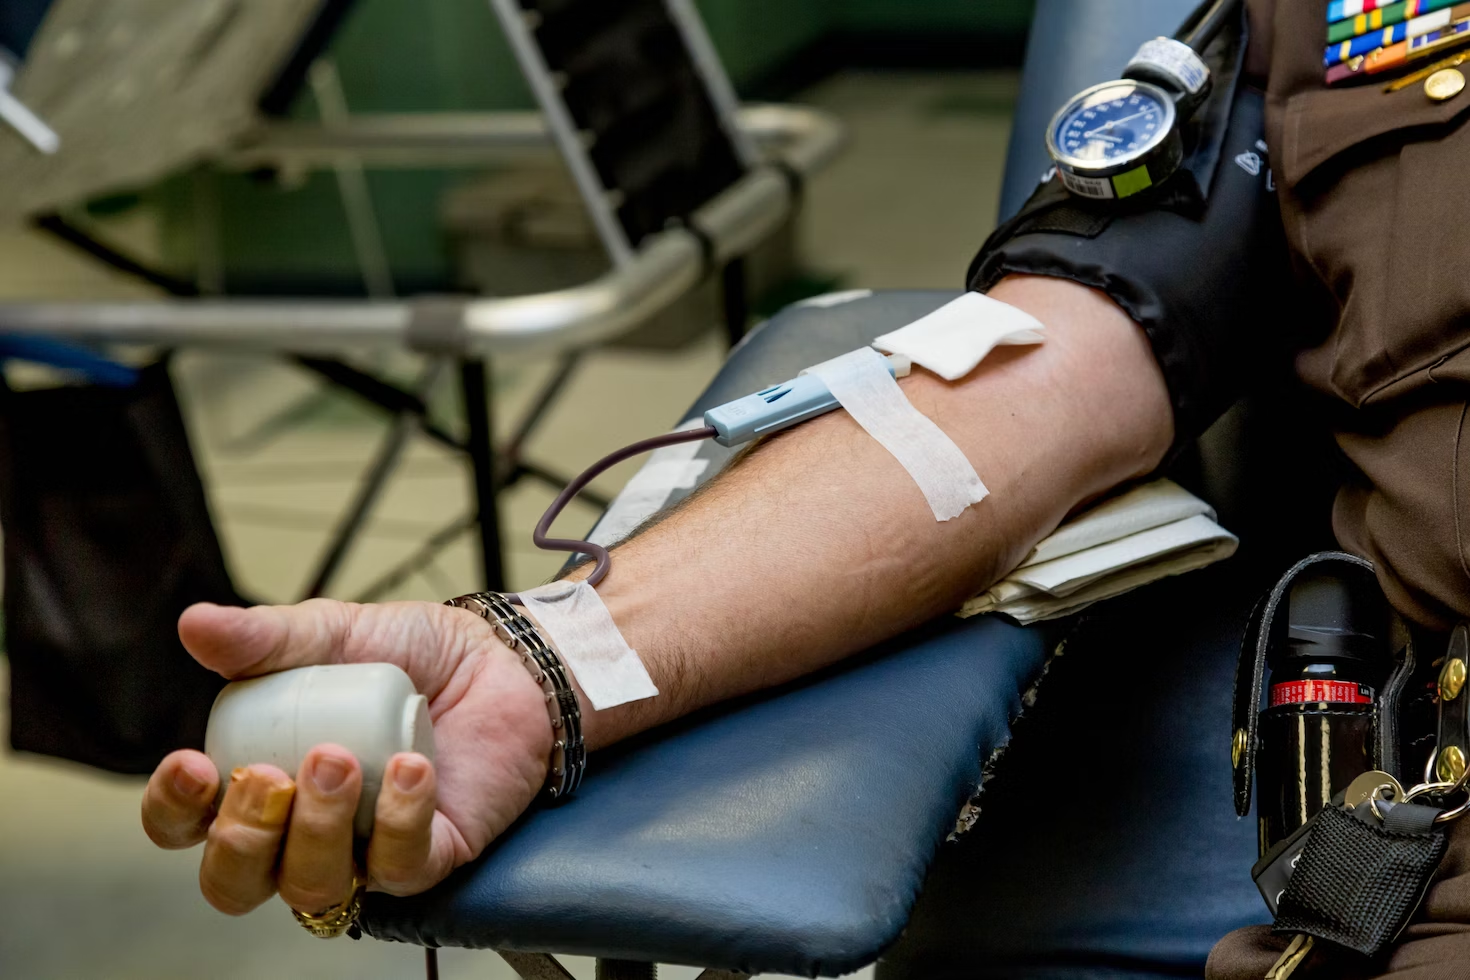 How To Donate Plasma For Money In The U.S.